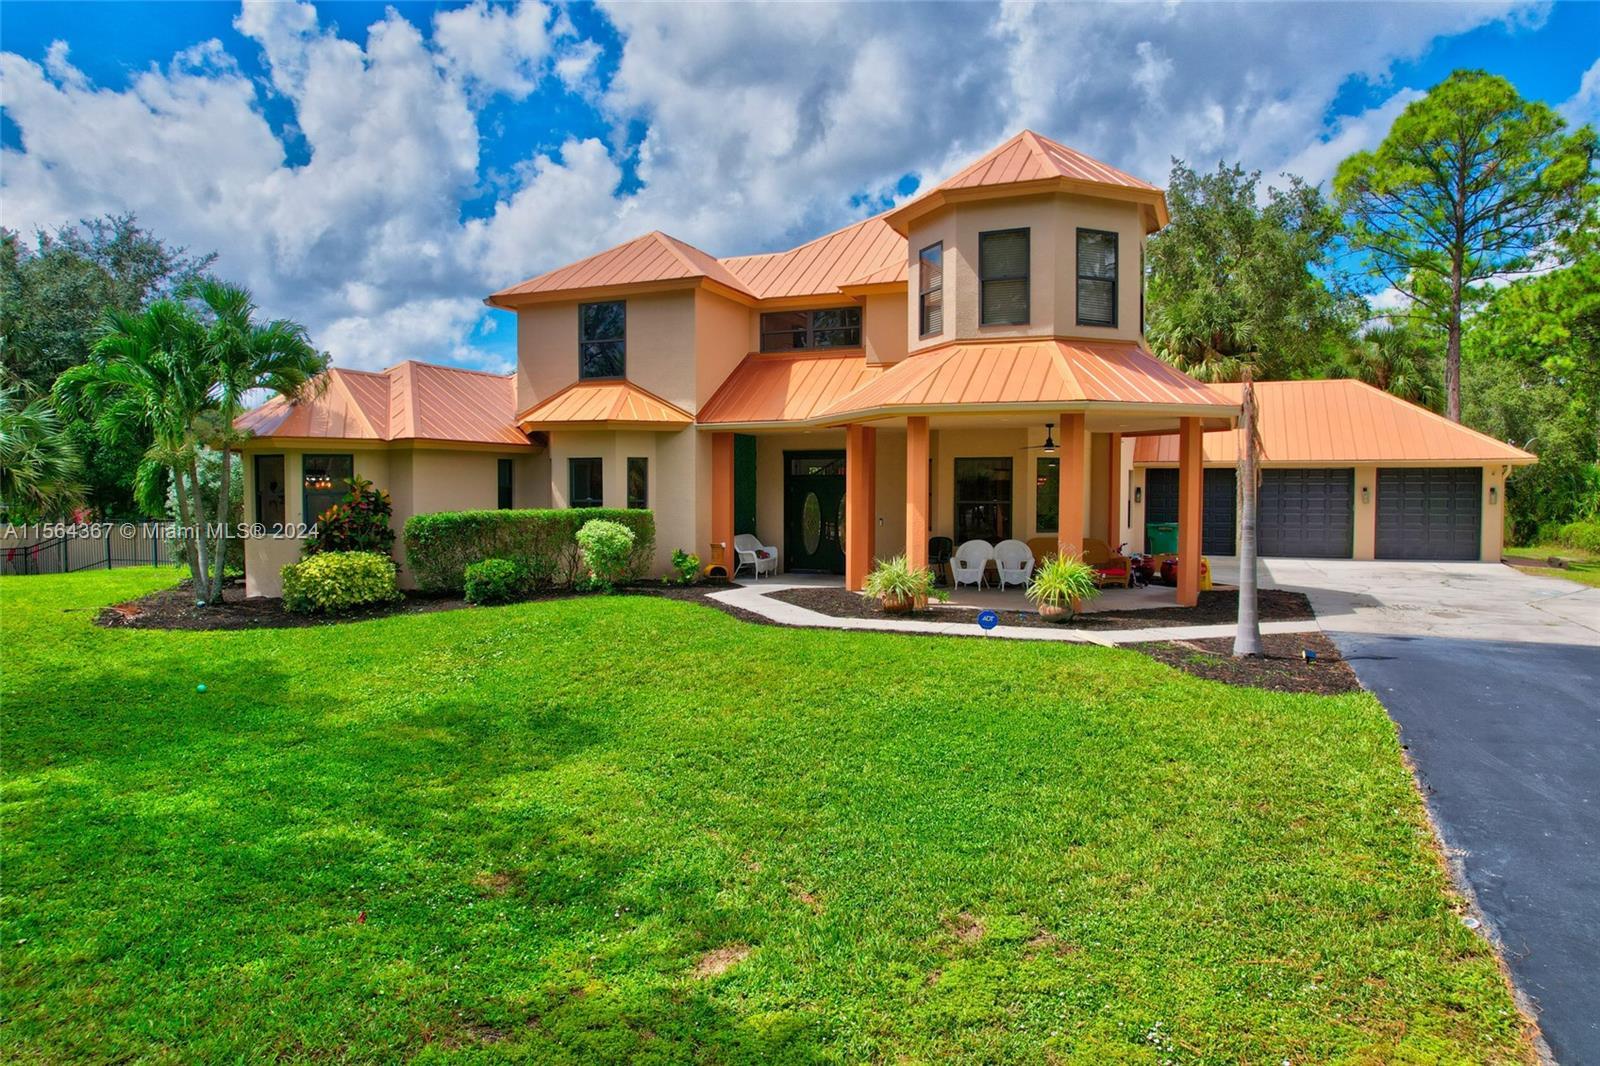 Photo of 2791 2nd St Nw in Naples, FL